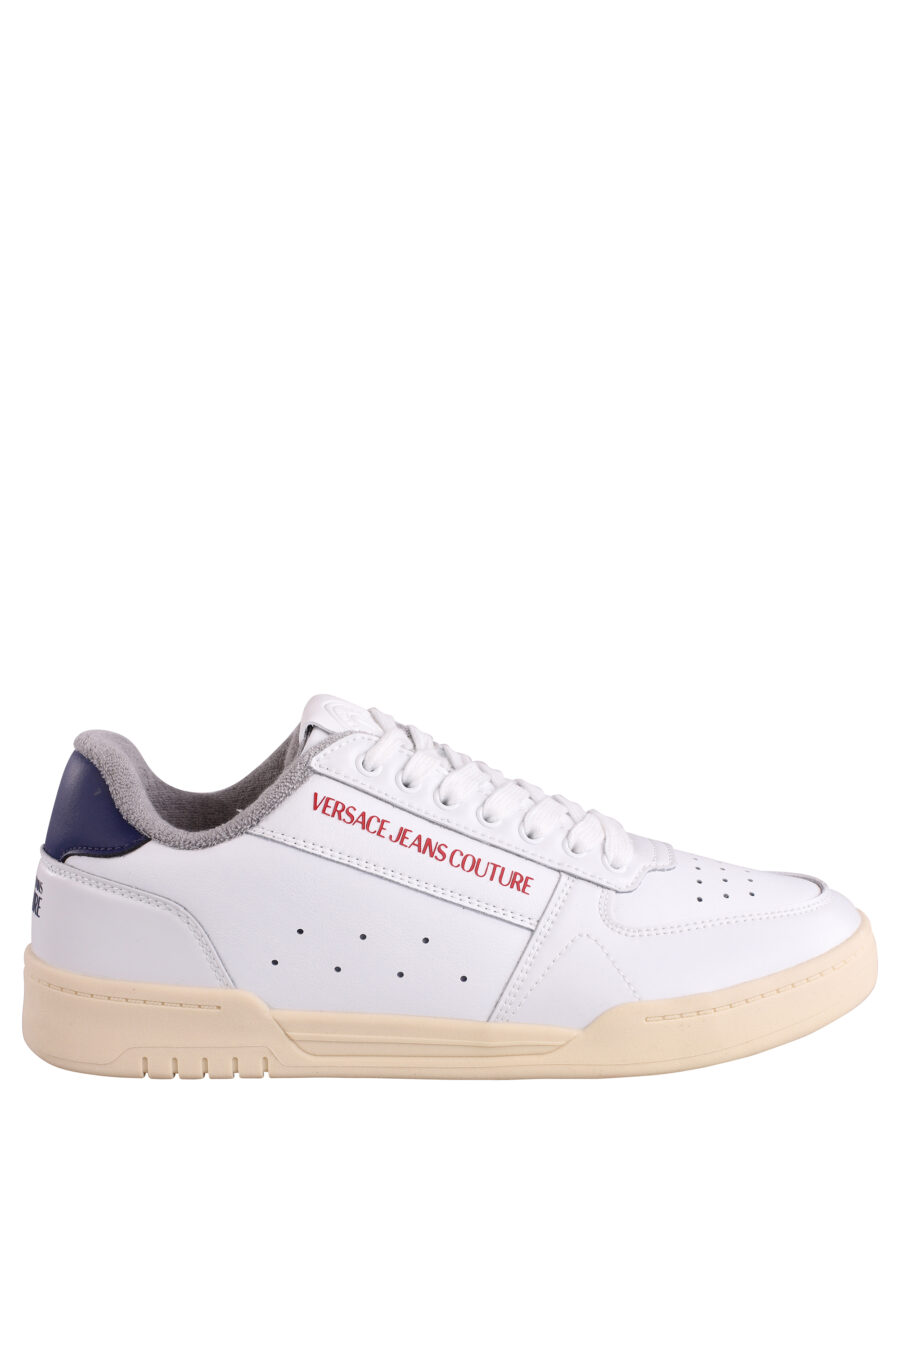 White trainers with red mini logo and blue detail - IMG 9024